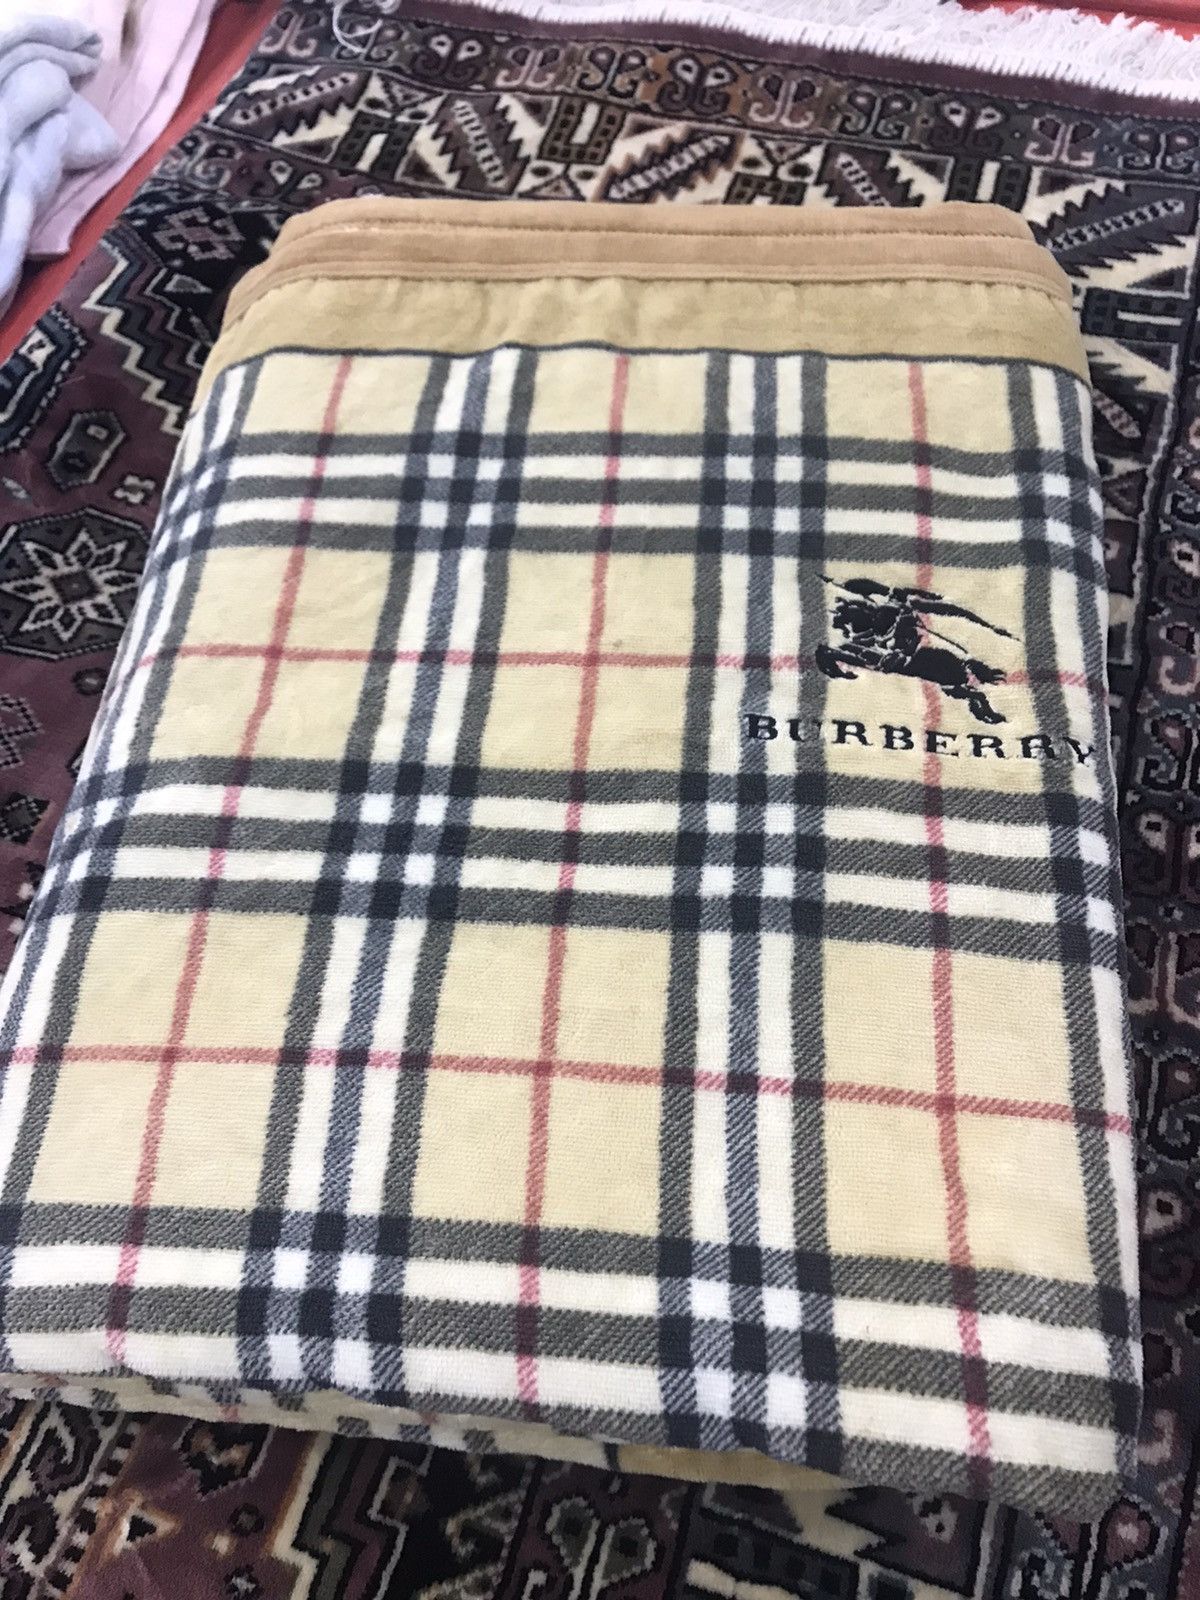 Burberry Burberry blanket Size ONE SIZE - 1 Preview